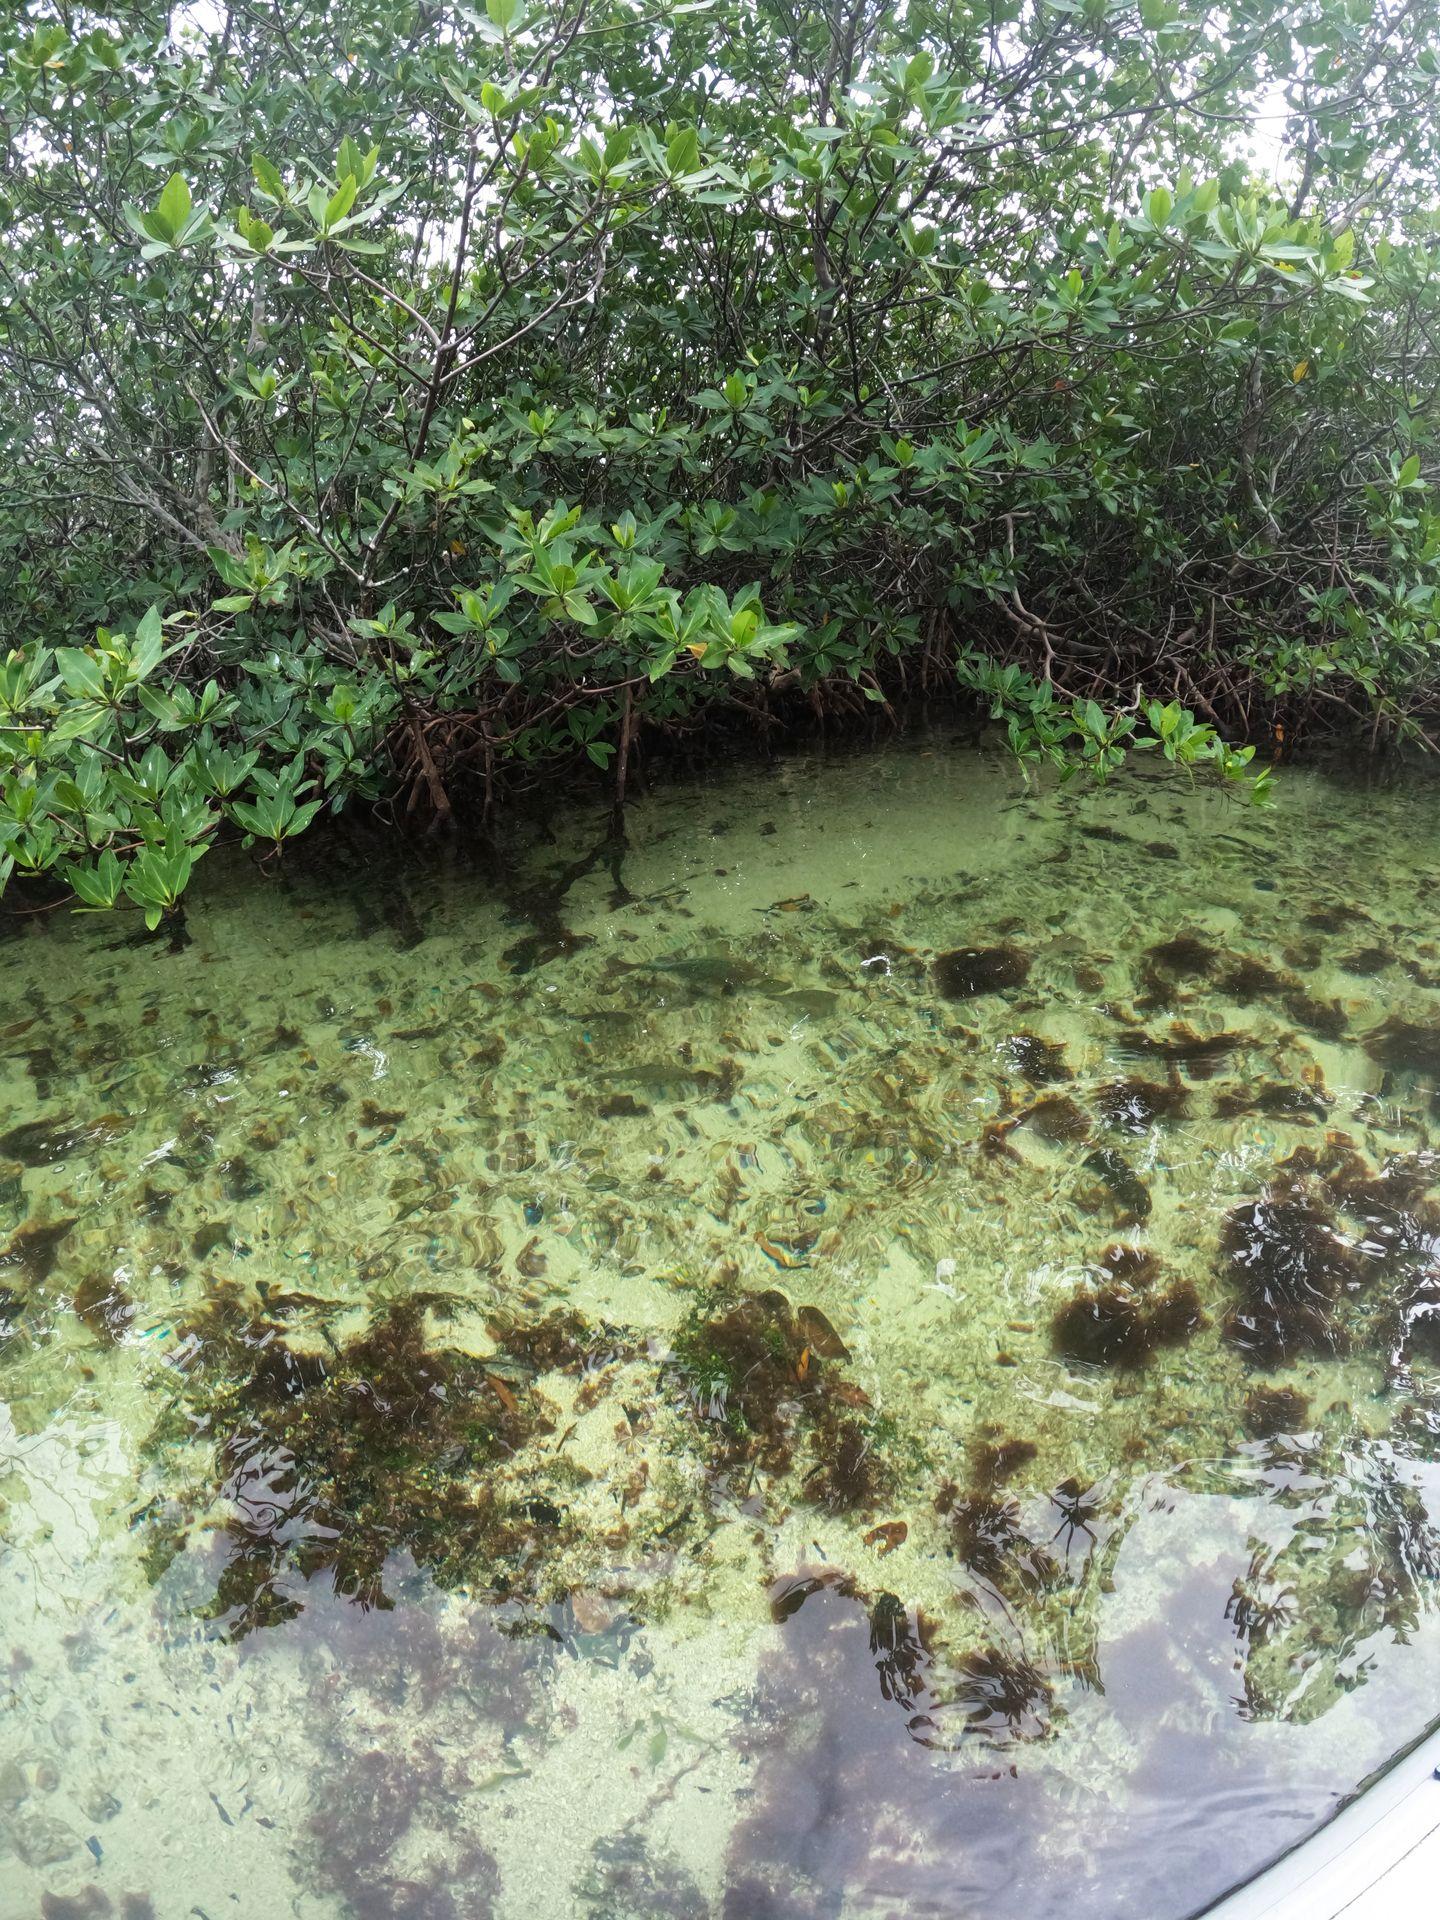 Clear and shallow water in Jones Lagoon. You can see the ocean floor and there are mangrove trees in the background.